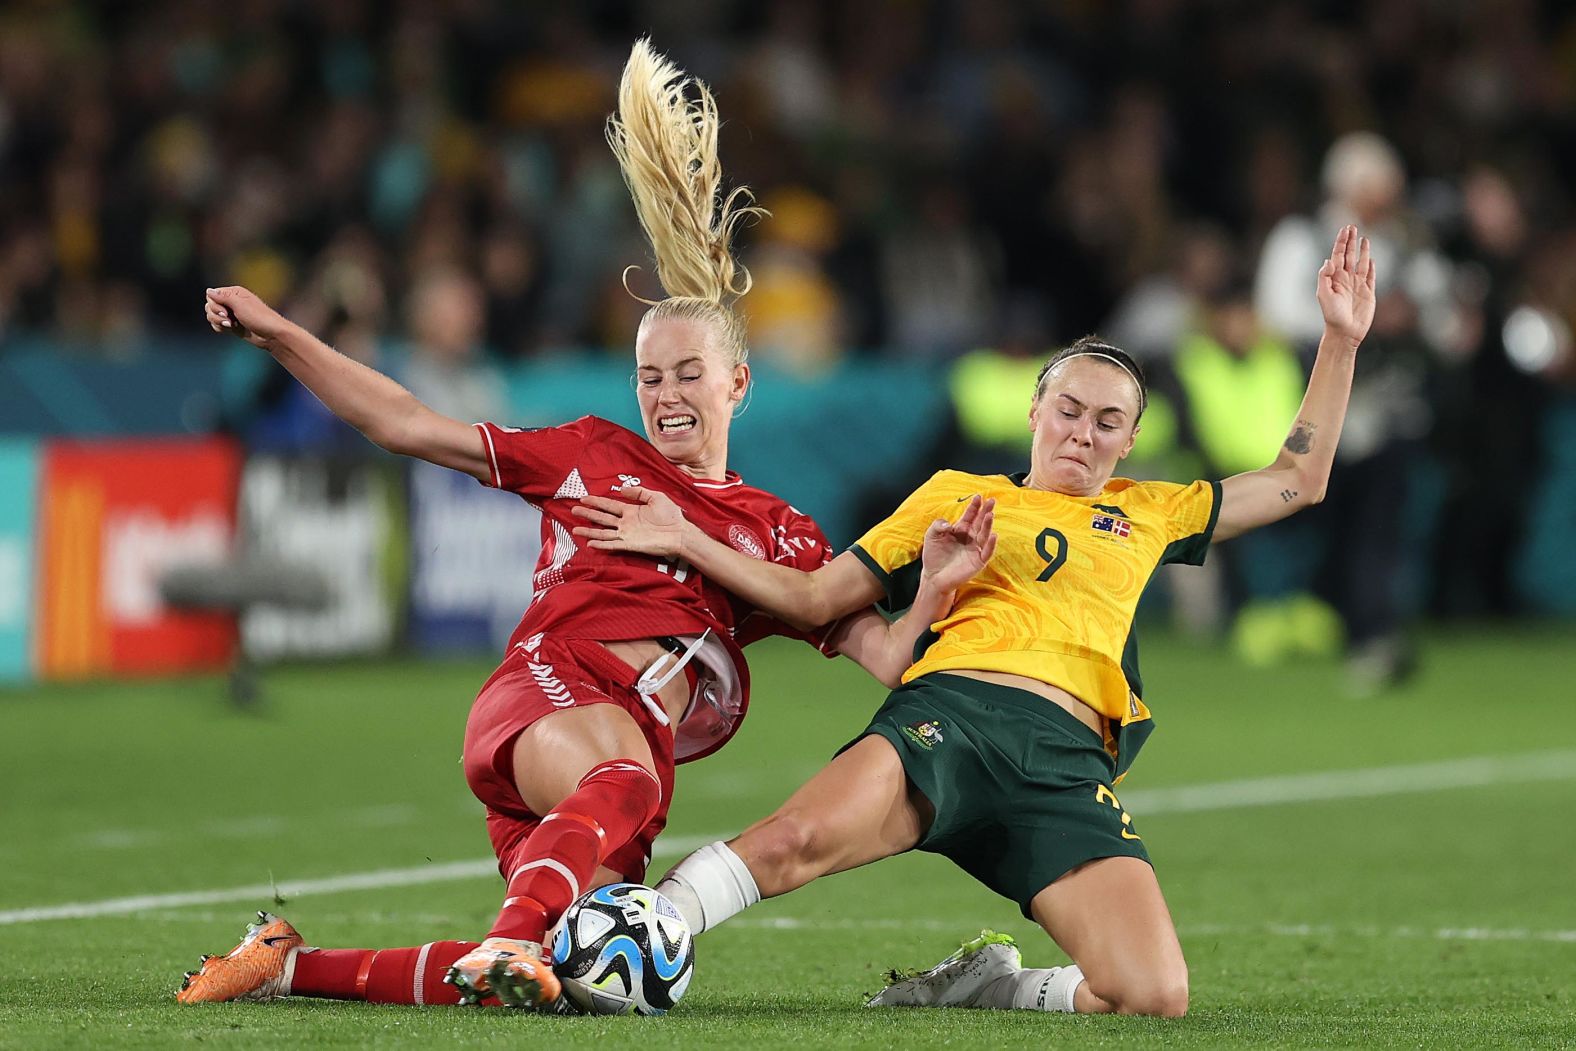 Denmark's Amalie Vangsgaard, left, and Australia's Caitlin Foord compete for the ball during a round-of-16 match on August 7. <a href="index.php?page=&url=https%3A%2F%2Fedition.cnn.com%2Fsport%2Flive-news%2Fengland-nigeria-australia-denmark-womens-world-cup-knockout%2Fh_96eb0aafc77d71f7b18c062bbe444f8a" target="_blank">Australia won 2-0</a> to advance to the quarterfinals.